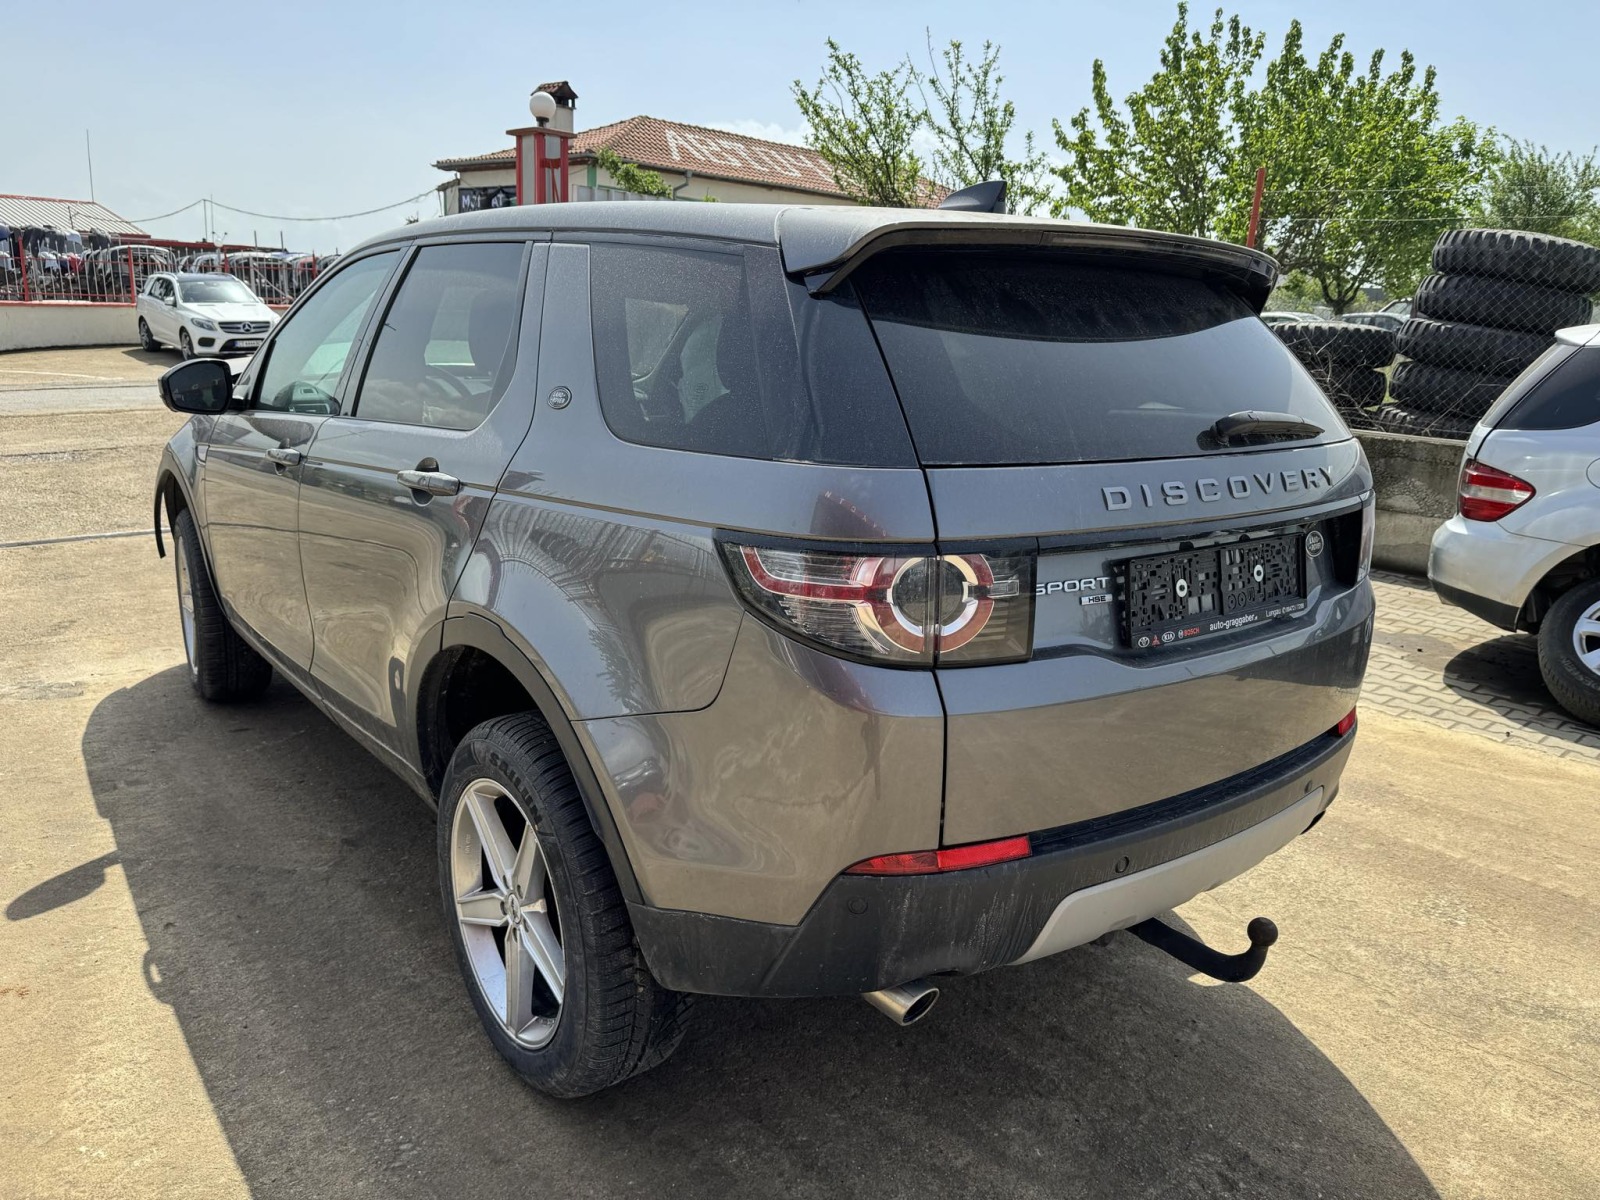 Land Rover Discovery 2.0 TD4 HSE - изображение 1